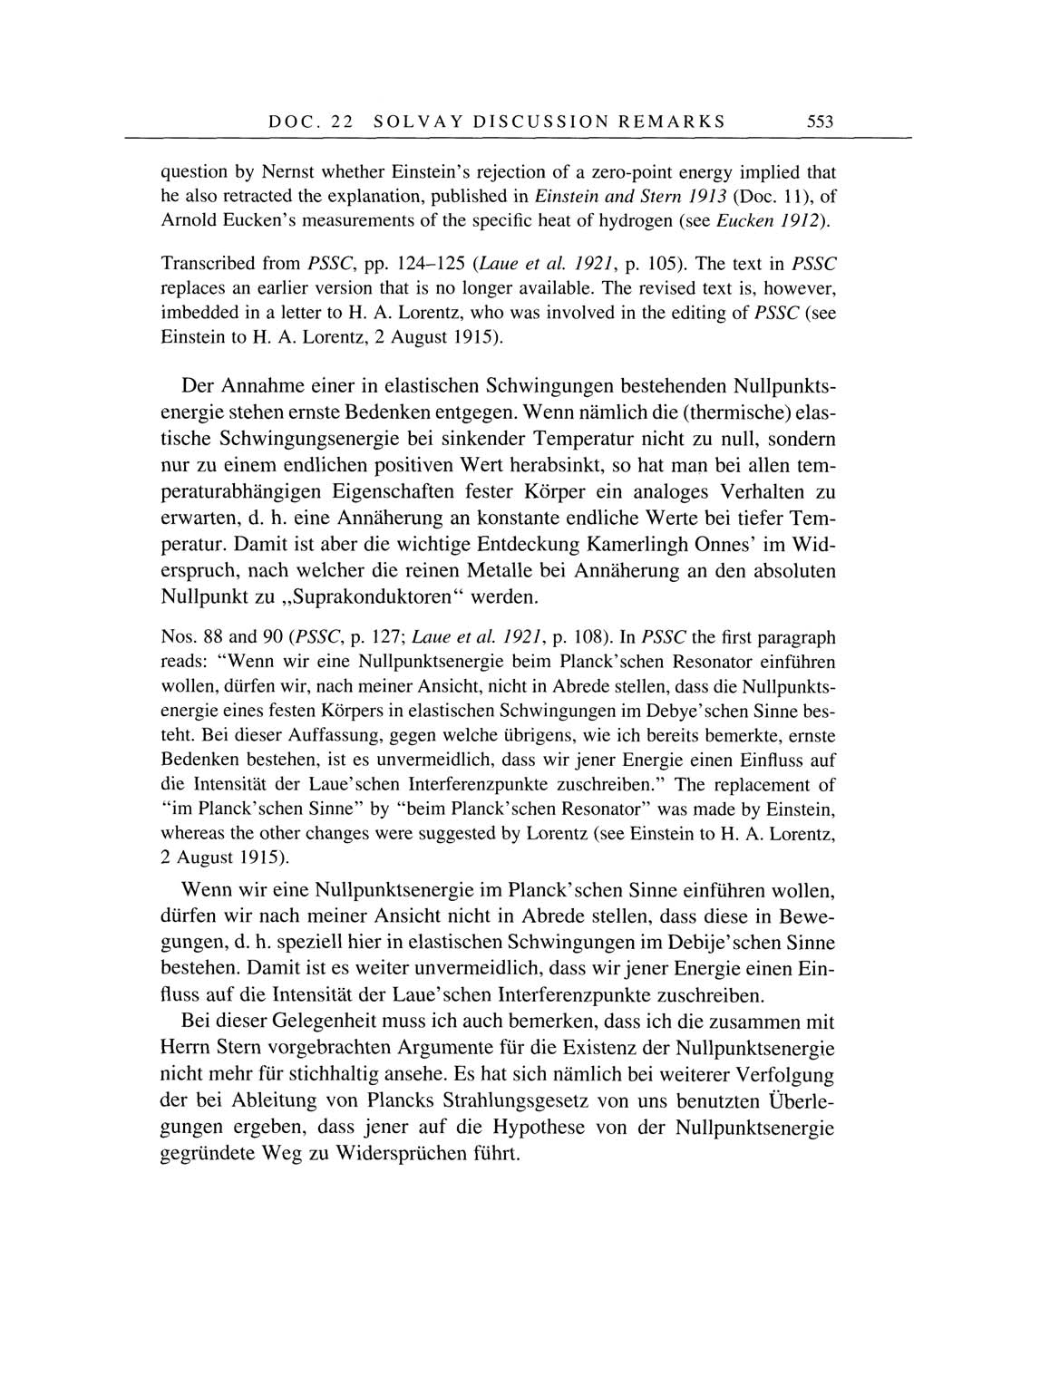 Volume 4: The Swiss Years: Writings 1912-1914 page 553